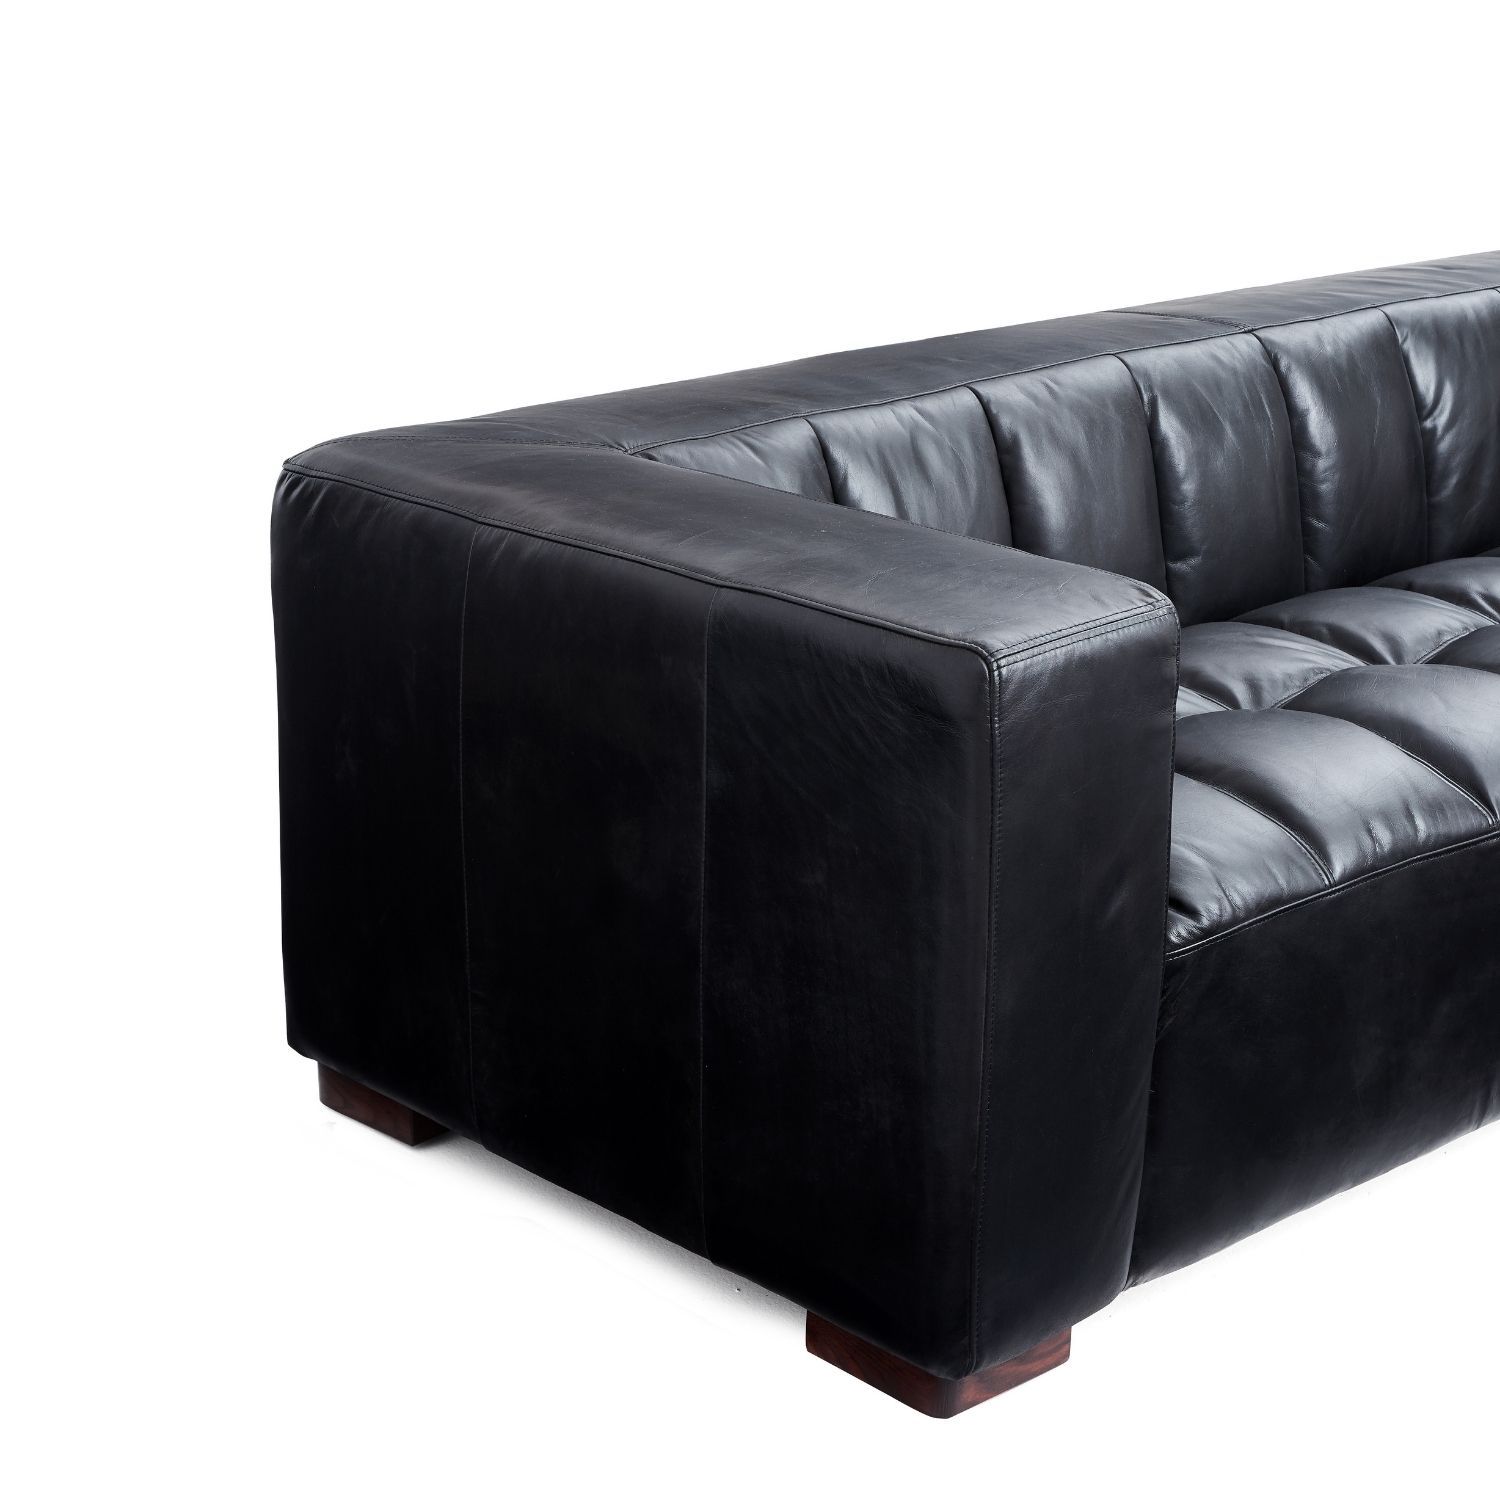 Gillow Sofa Bed Foundry 